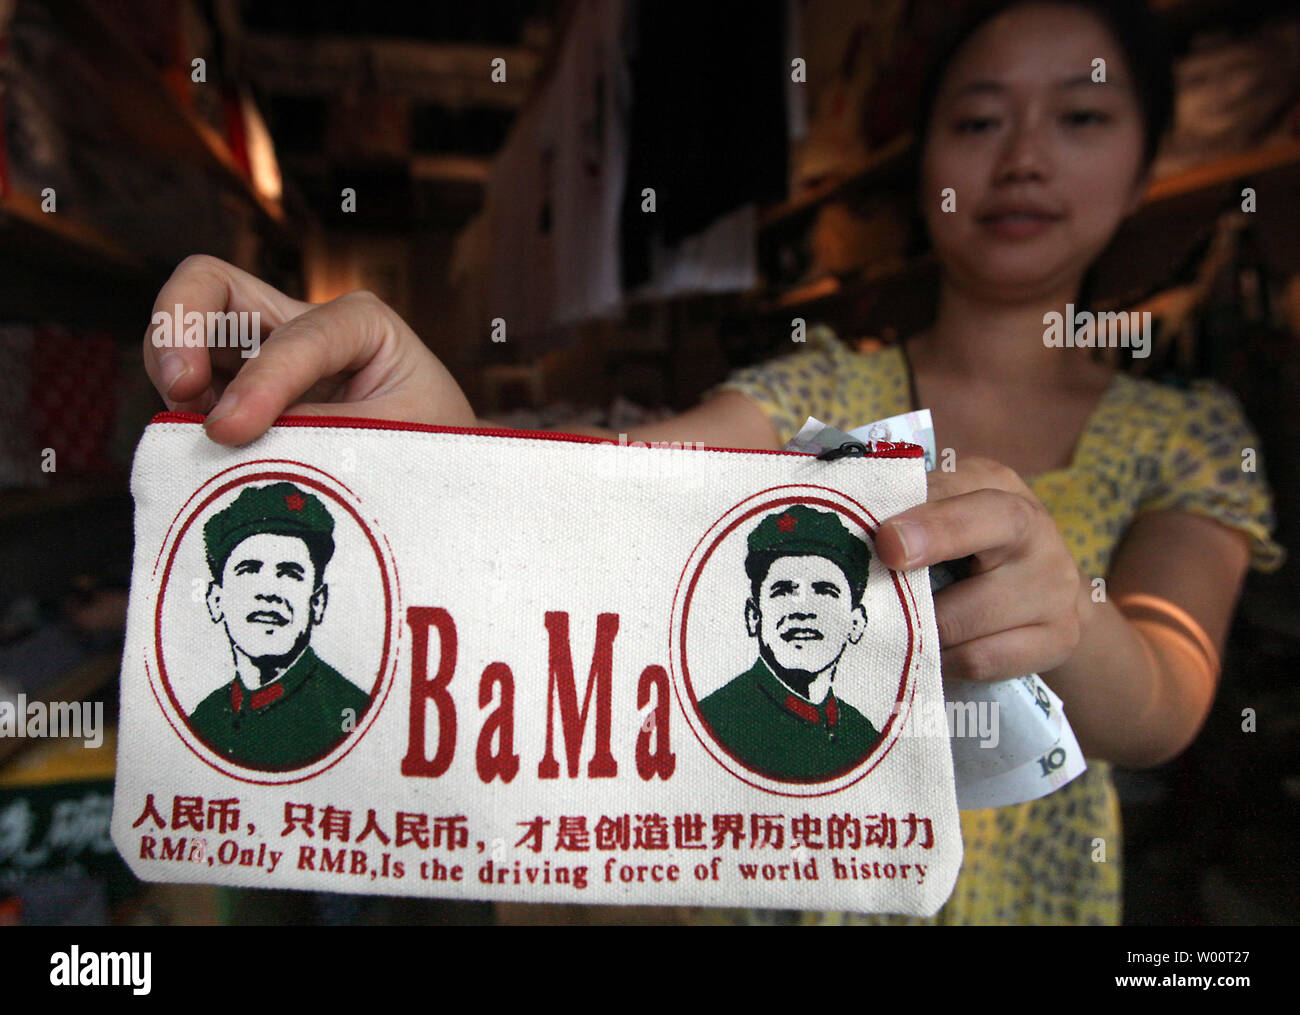 Money wallets and bags featuring U.S. President Barack Obama dressed in the Red Army communist fatigues of China's former helmsman Chairman Mao Zedong are being sold in shops in Beijing, September 14, 2010.  'Oba-Mao' t-shirts and accessories are big sellers in Beijing due to Obama's unflagging popularity among many Chinese.    UPI/Stephen Shaver Stock Photo